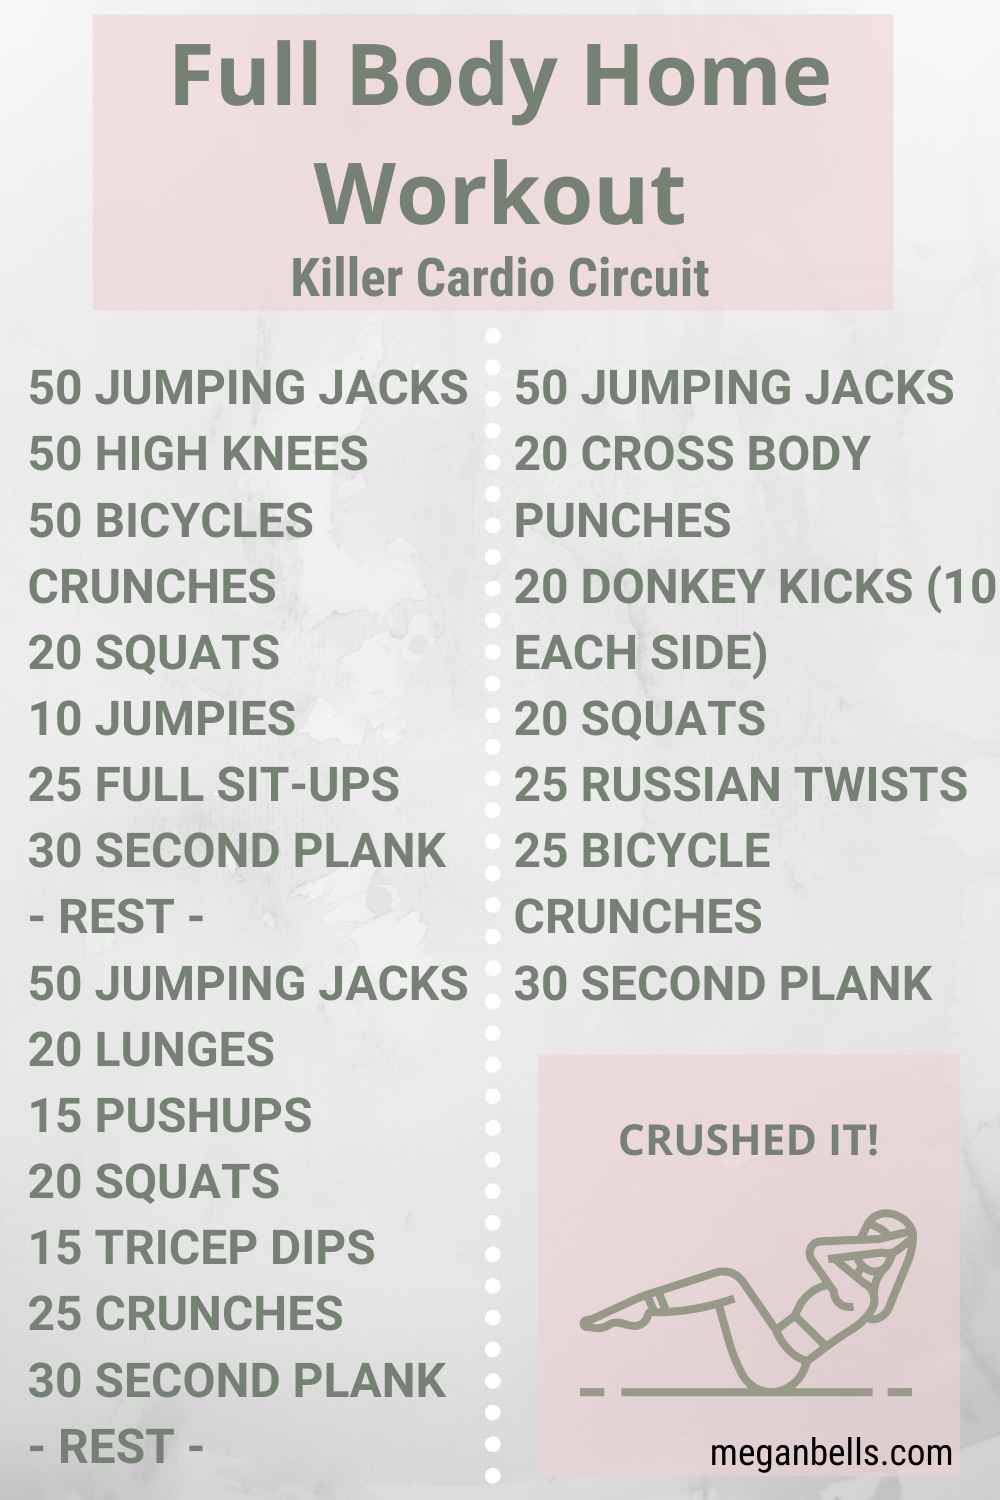 Fully body home workout